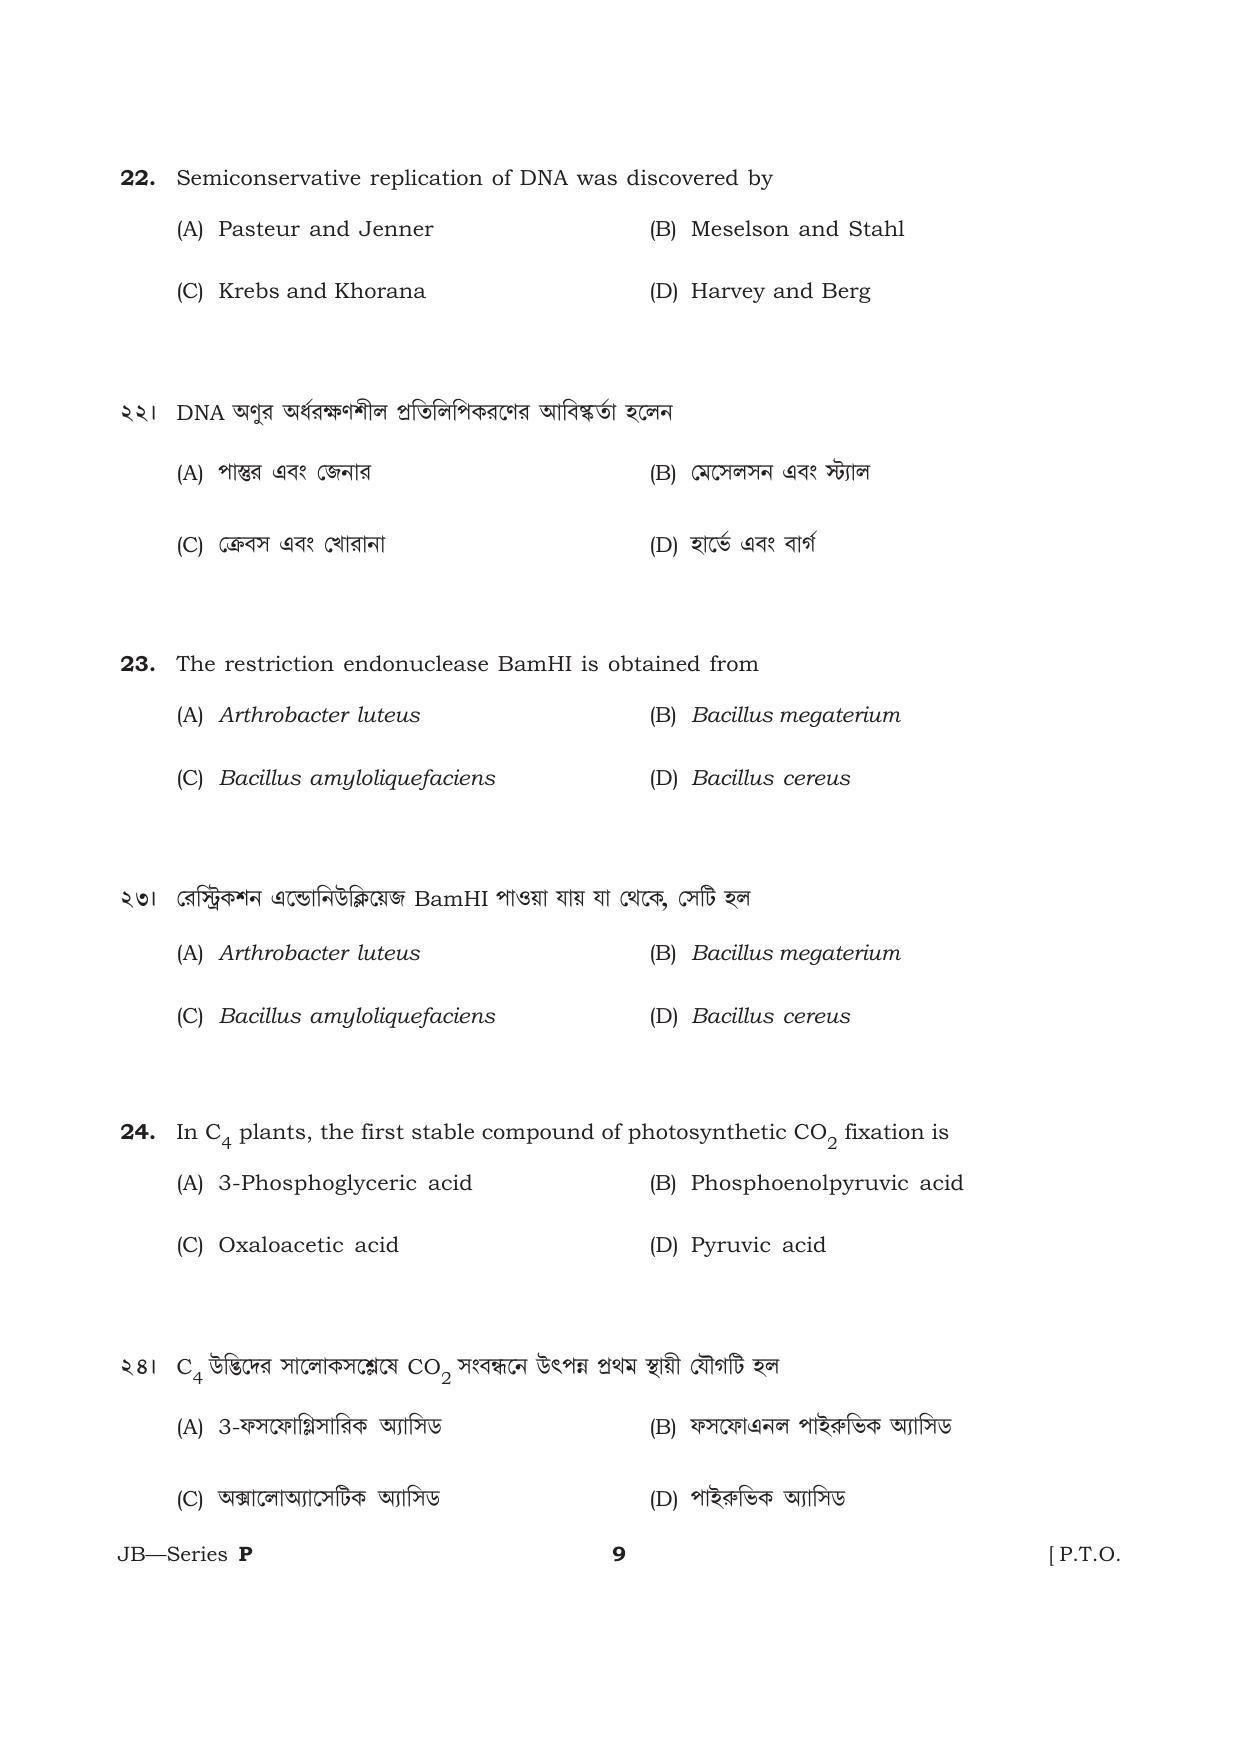 TBJEE Question Paper 2021 - Biology - Page 9